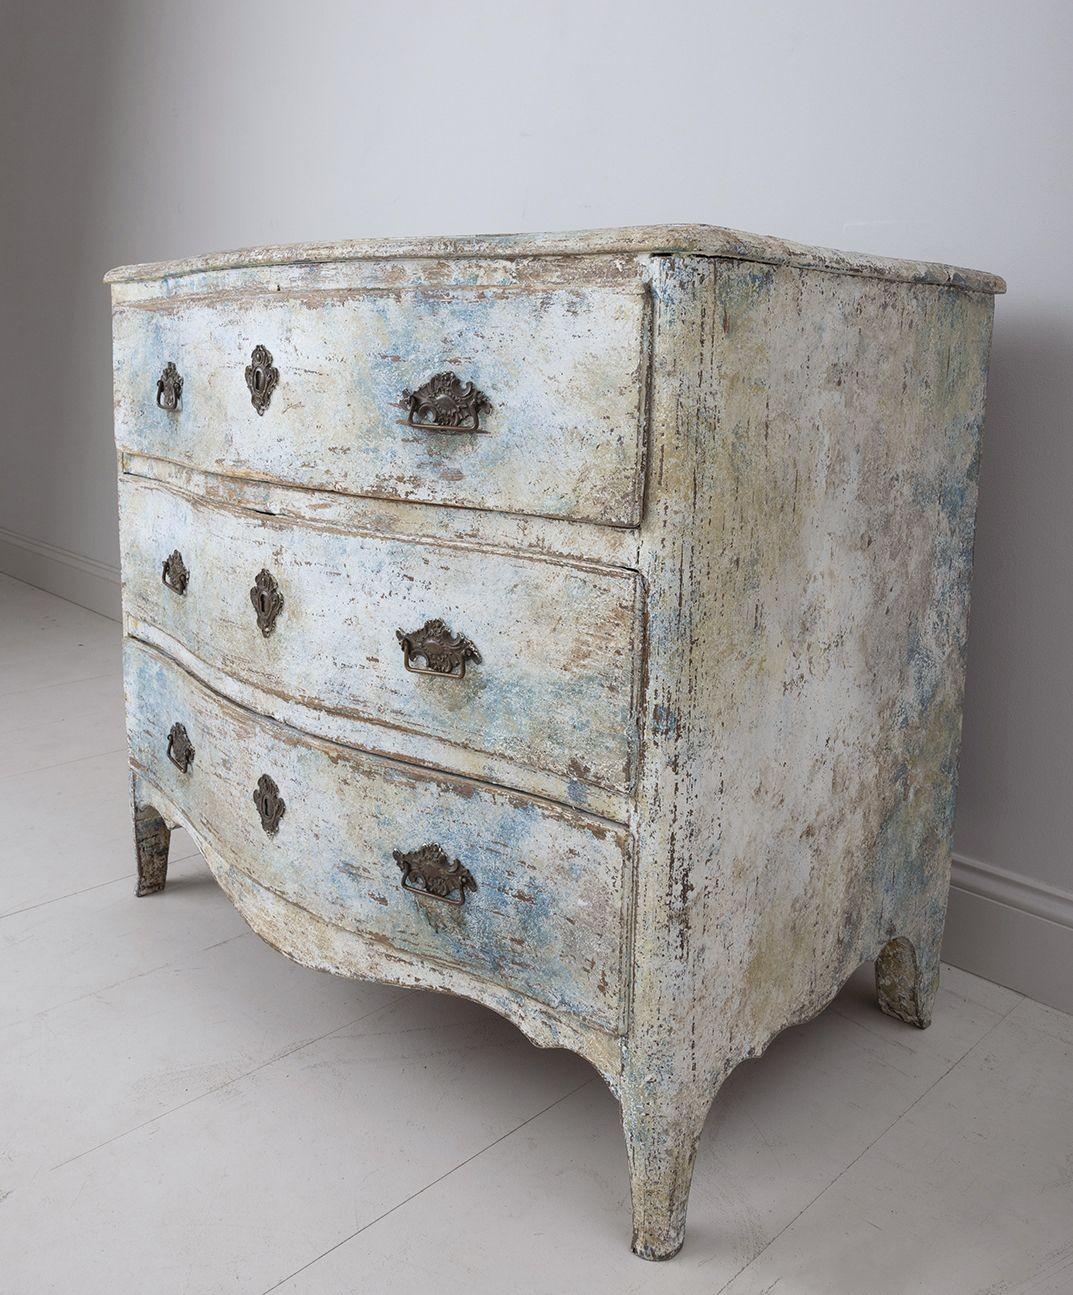 This is a beautiful Swedish commode from the Rococo period, circa 1760 in original scraped paint with original bronze hardware.  The commode has a serpentine front, shaped top, and scalloped apron. There are three spacious drawers with plenty of